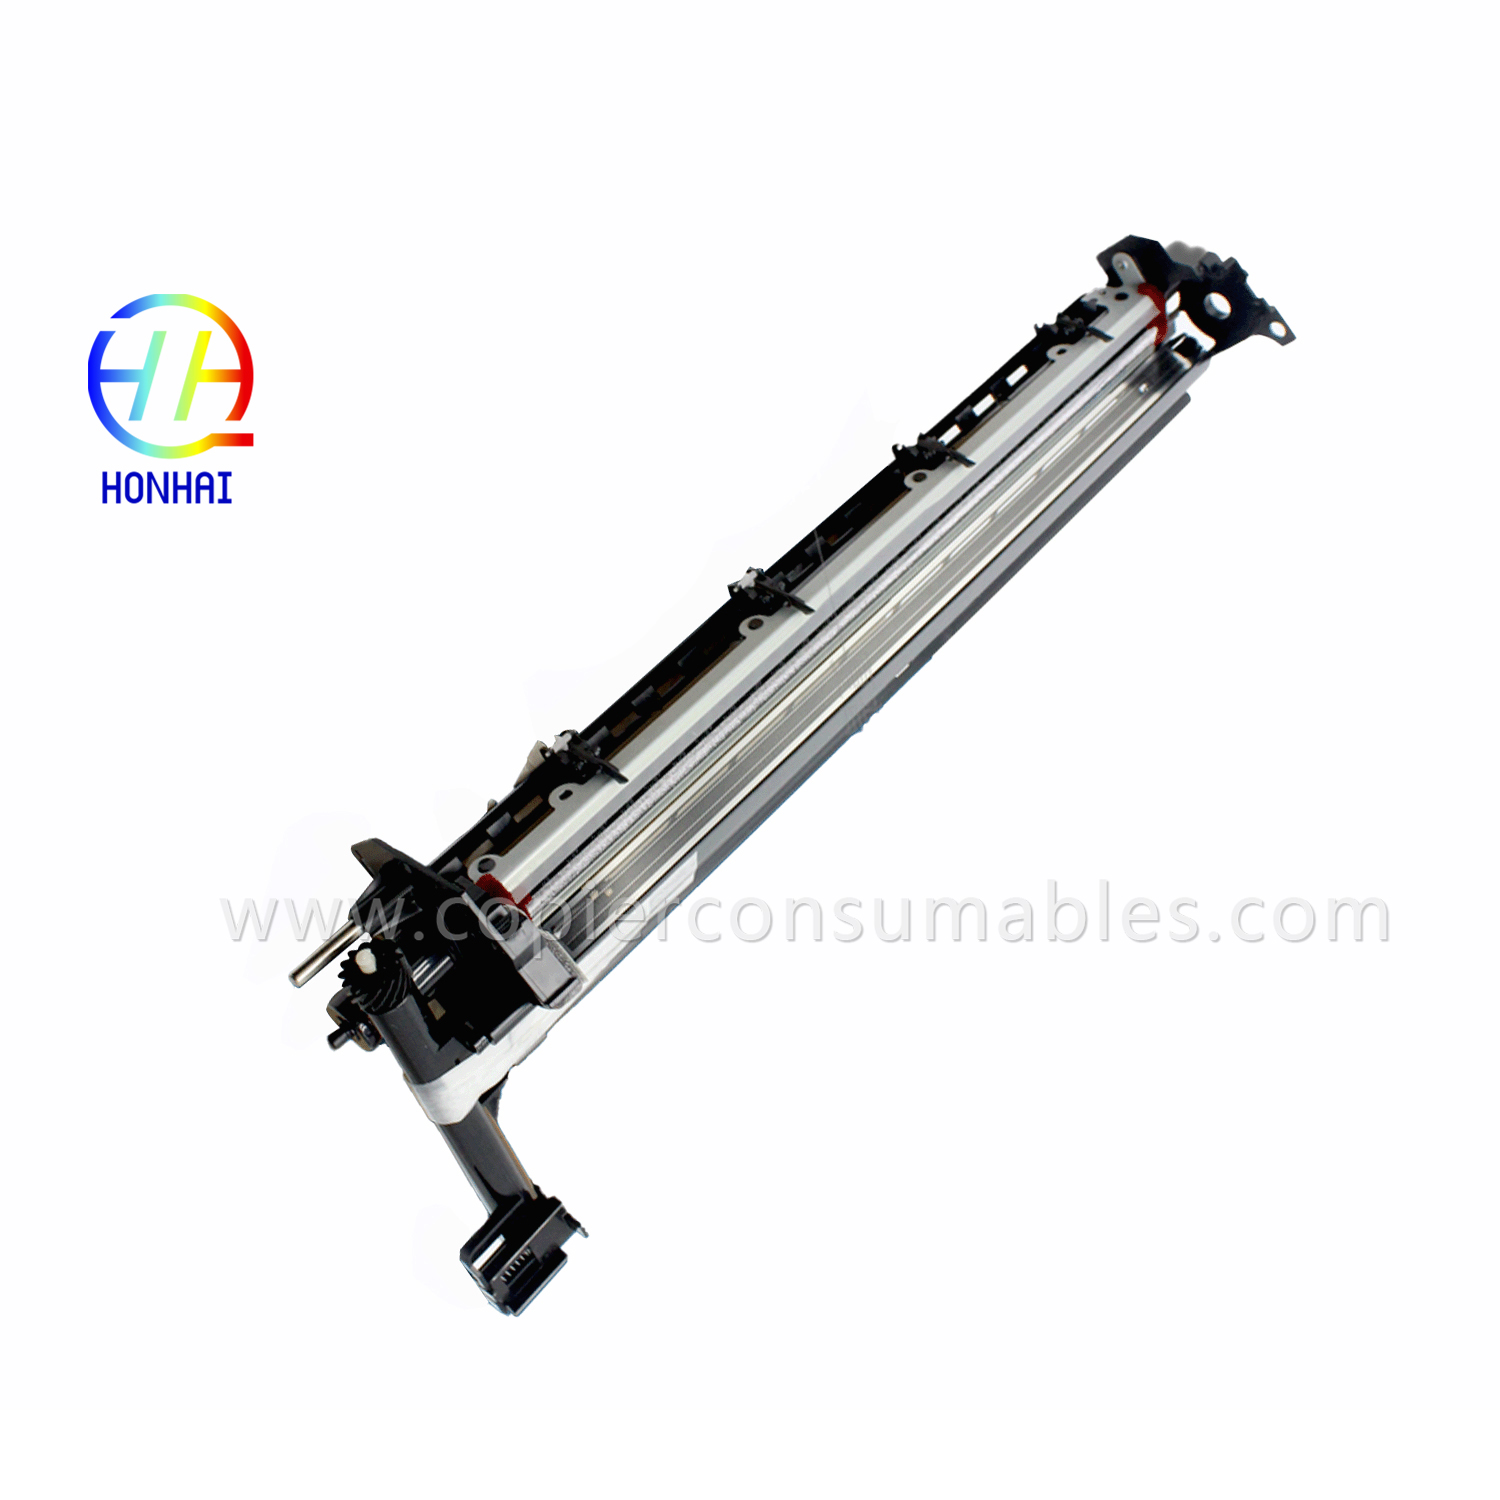 Drum Frame Assembly for Sharp Ar-5320 5320d Arm-160 162 205 207 (Sharp CFRM-0021RS5T CFRM-0021RS6D Toshiba 6LS11678000)